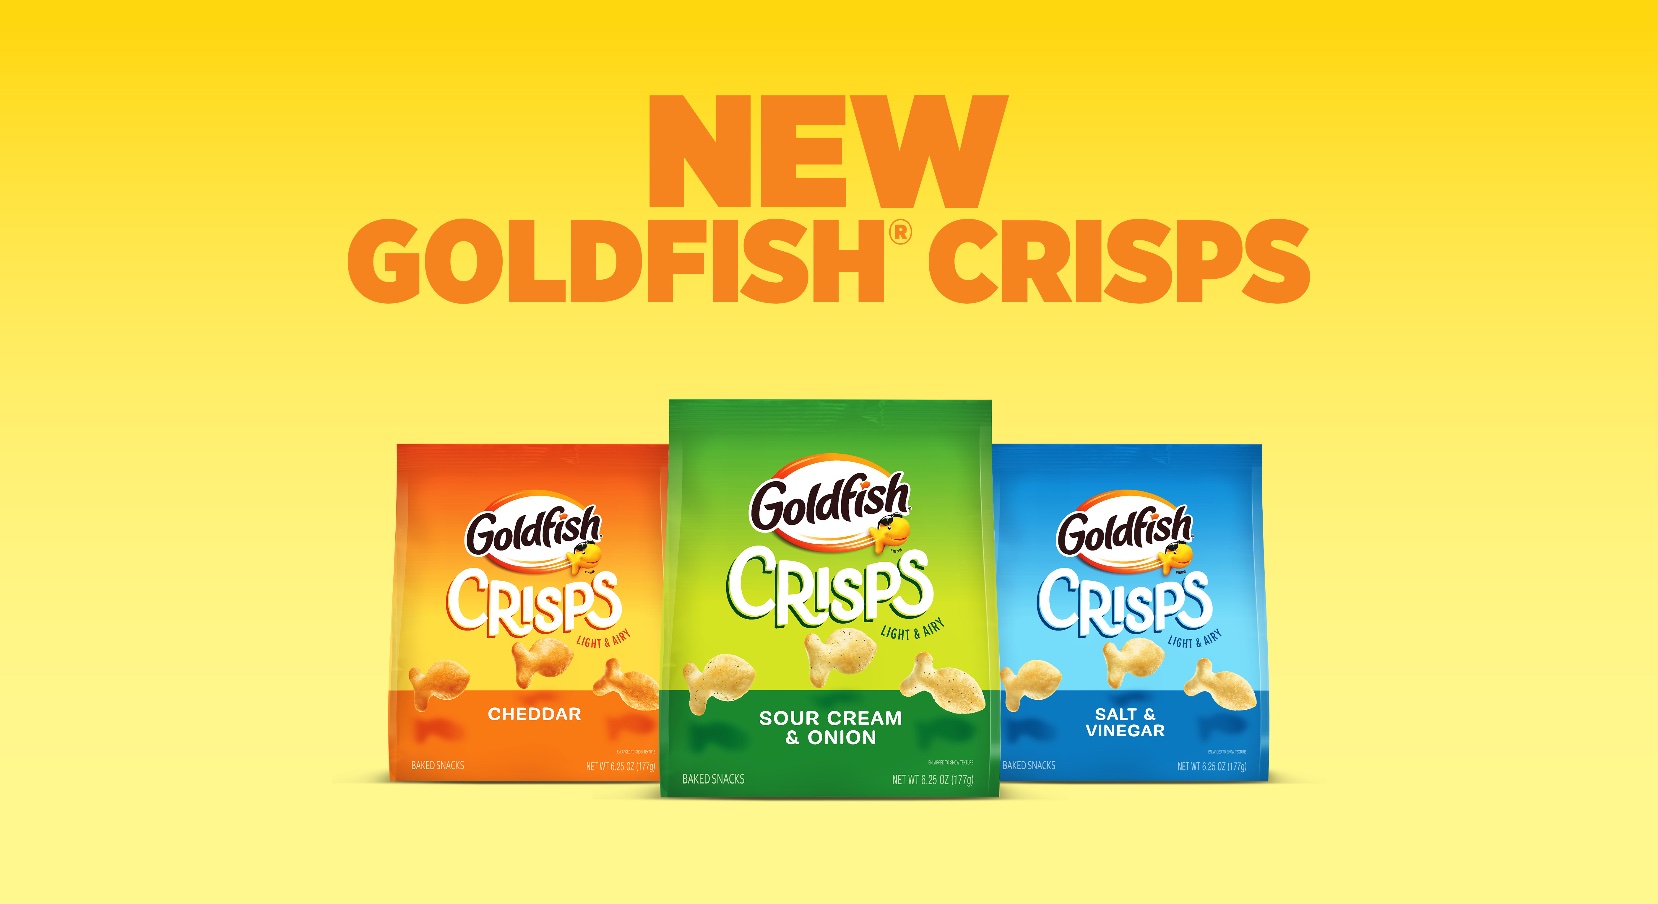 Goldfish Swims Into the Chip Category